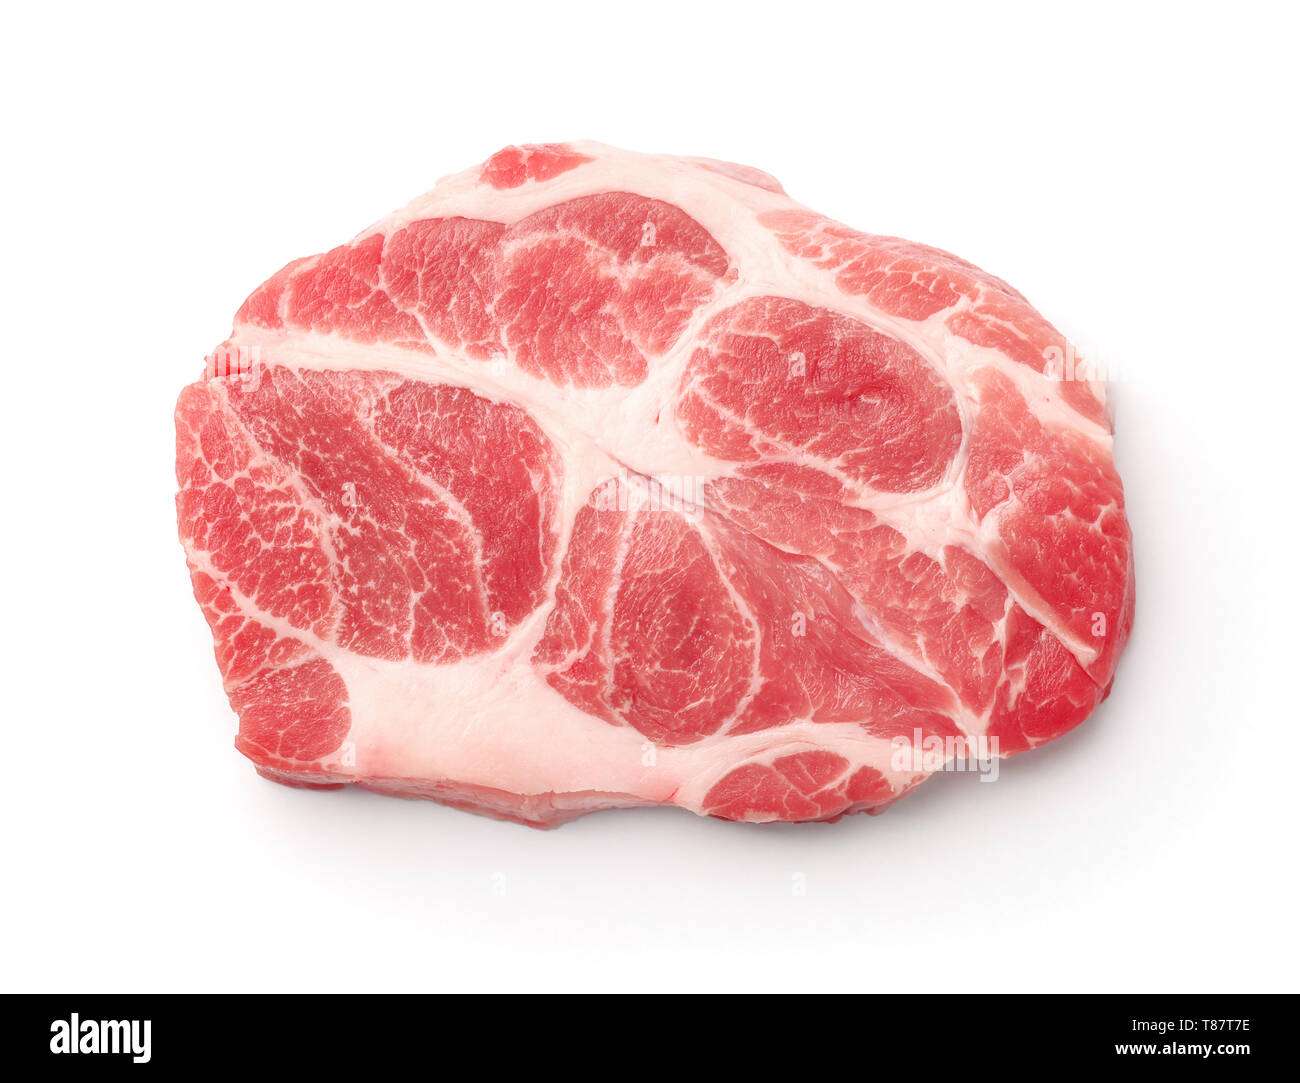 Boneless lamb Cut Out Stock Images & Pictures - Alamy